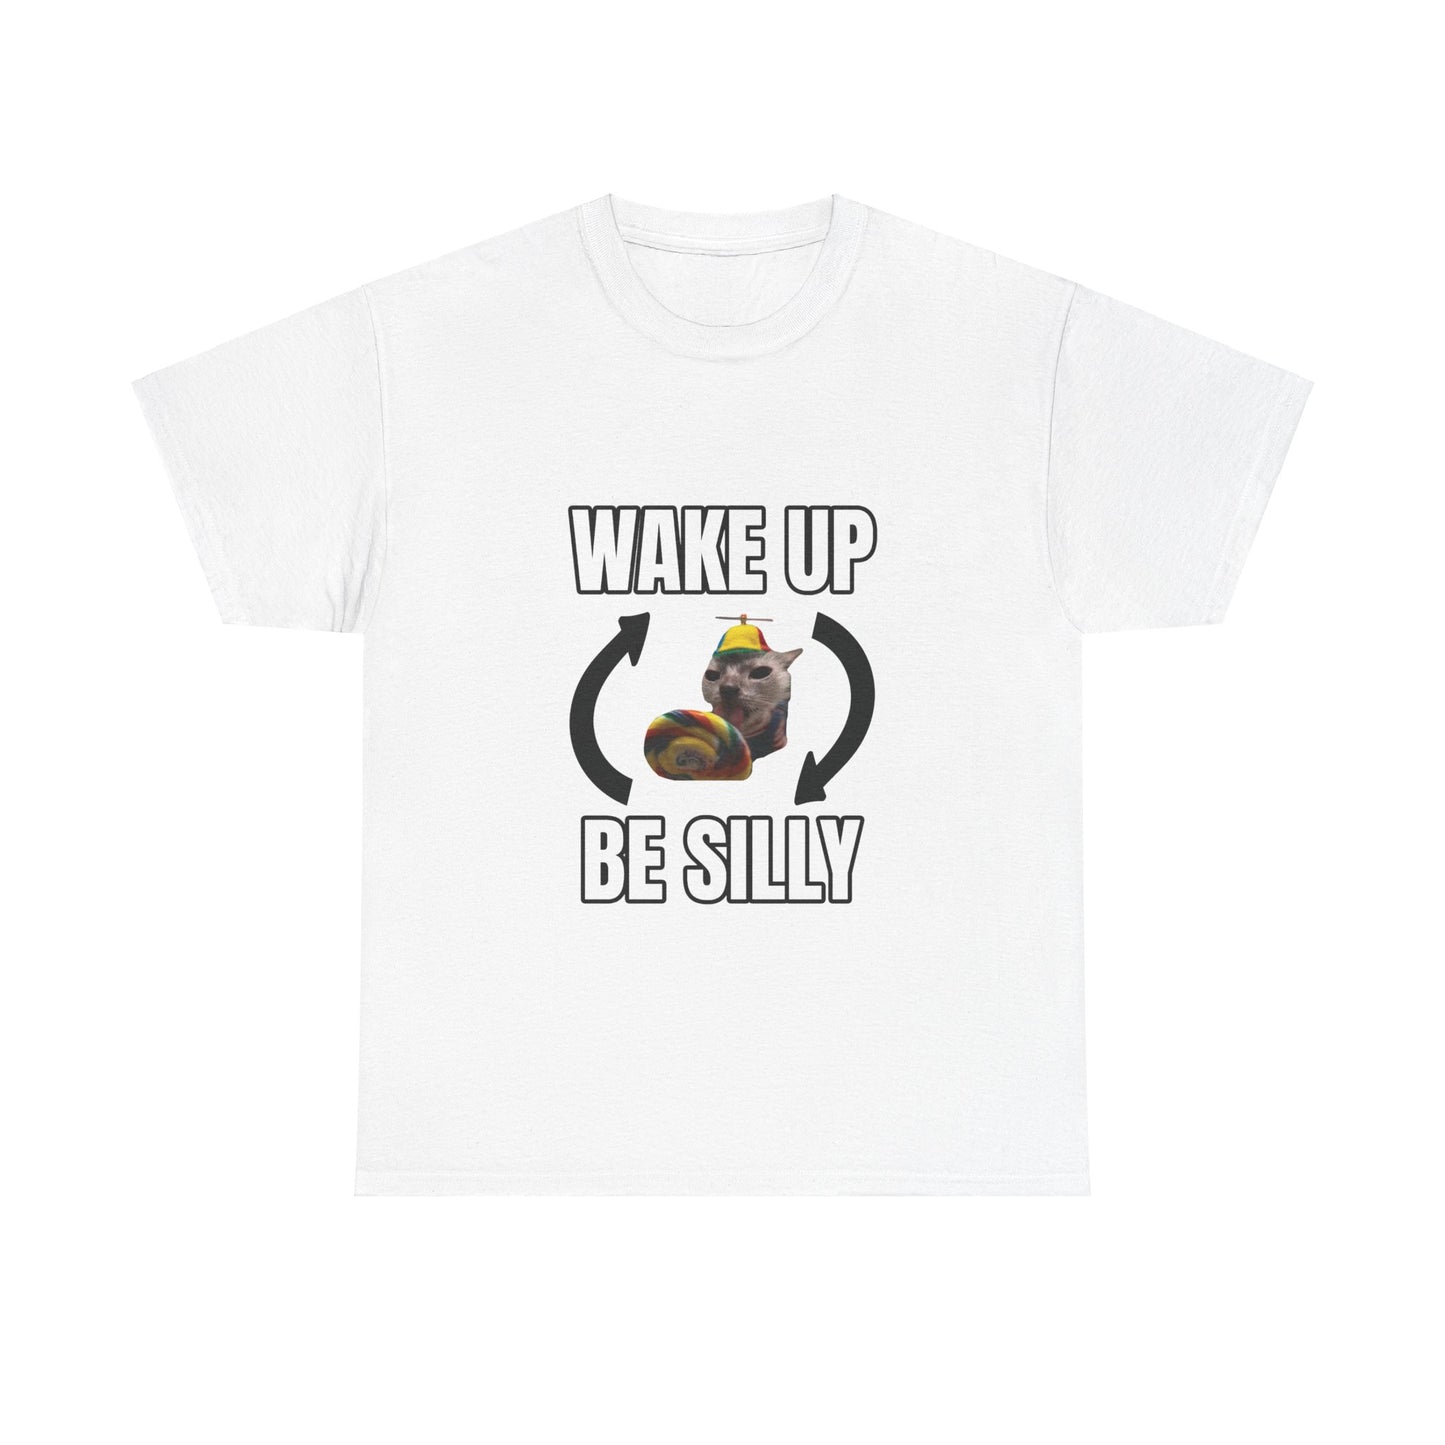 WAKE UP BE SILLY SHIRT